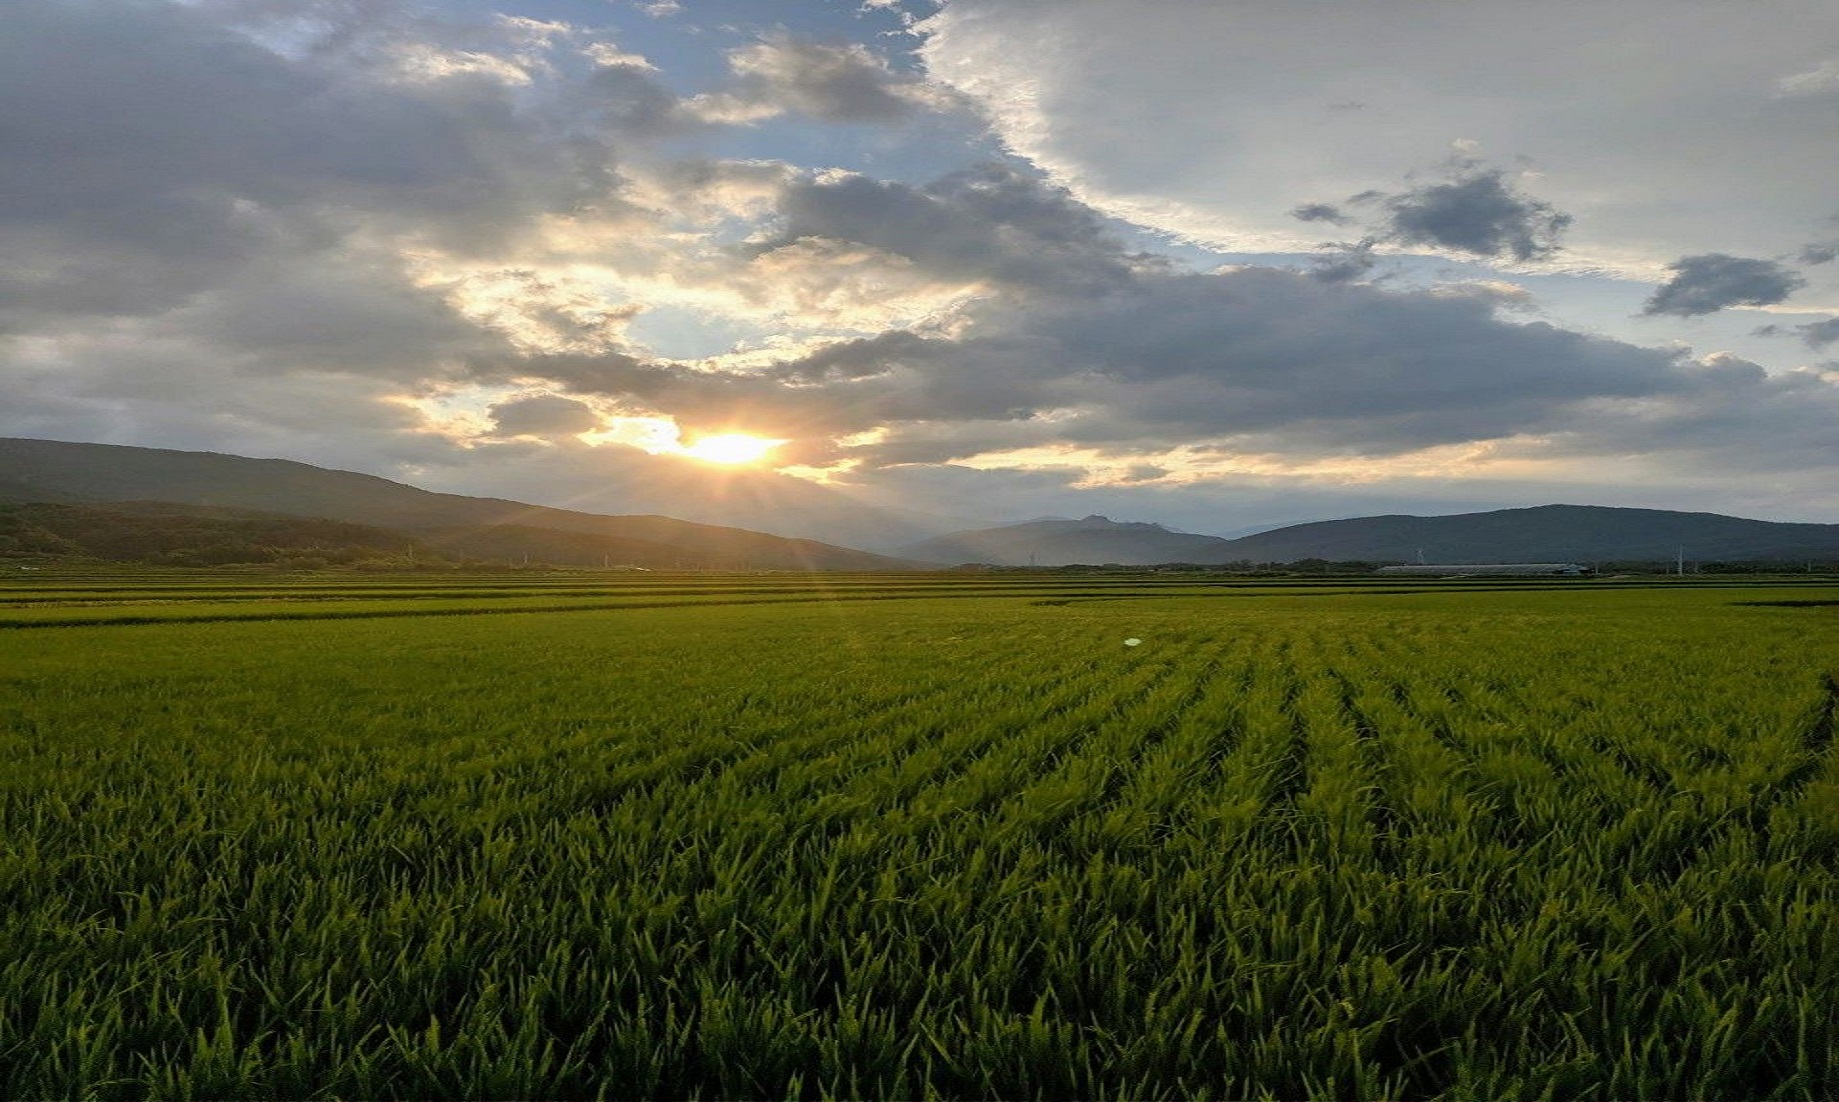 S.Korea’s Rice Production Estimated To Rise 9.1 Percent In 2021